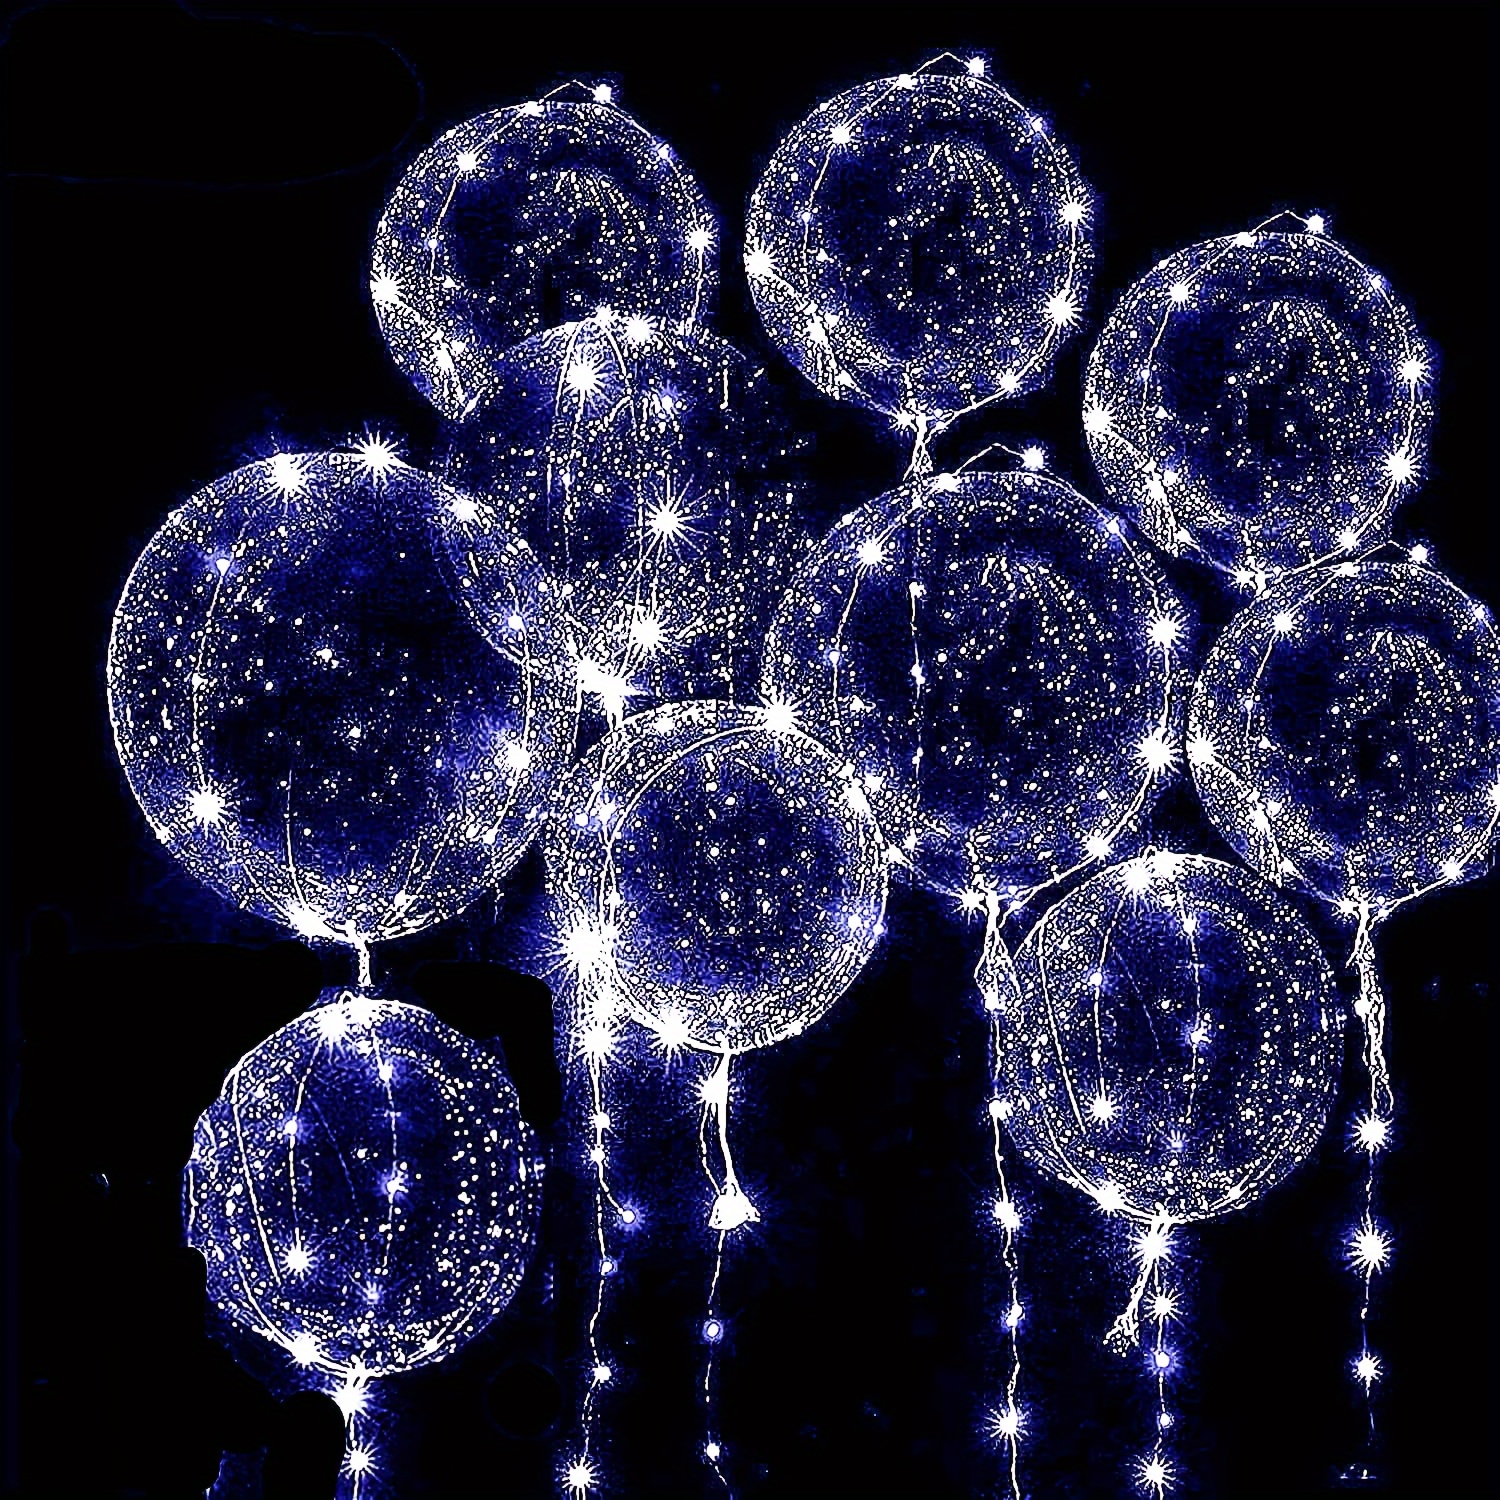 

7pcs Transparent Balloons With 7pcs Led 3-meter String Lights For Birthday, Graduation Party, Wedding, Valentine's Day, Halloween, Christmas House Decoration Easter Gift